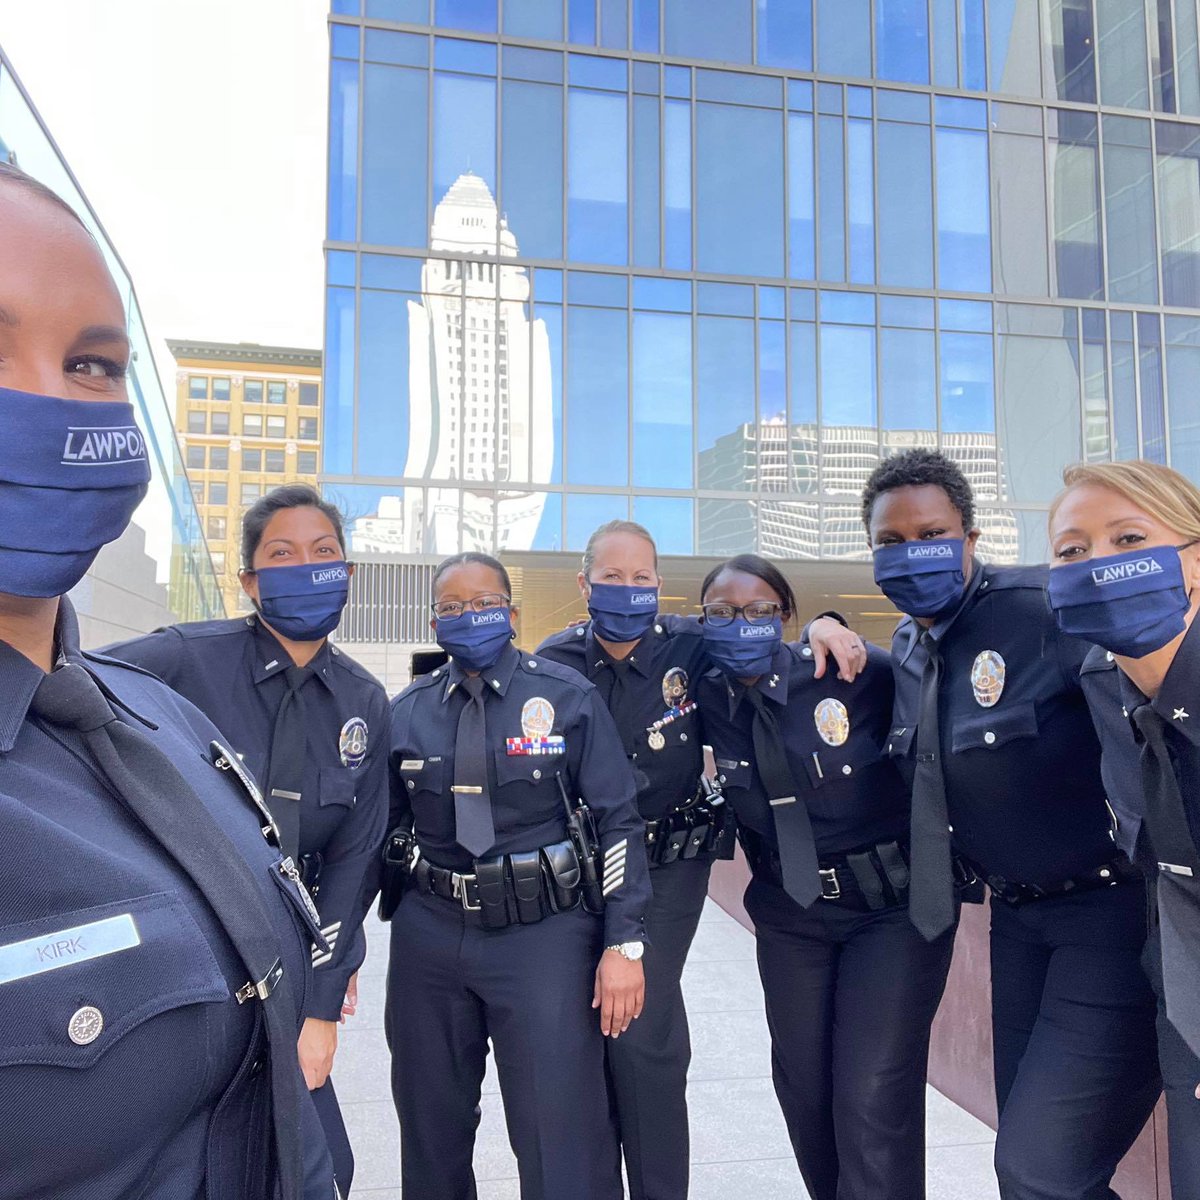 The 30x30 initiative’s goal is to ensure policing agencies are truly representative of the communities we serve. While 30x30 is focused on advancing women in policing, these principles are applicable to all demographic diversity, not just gender. #AdvanceWomeninPolicing #LAPD